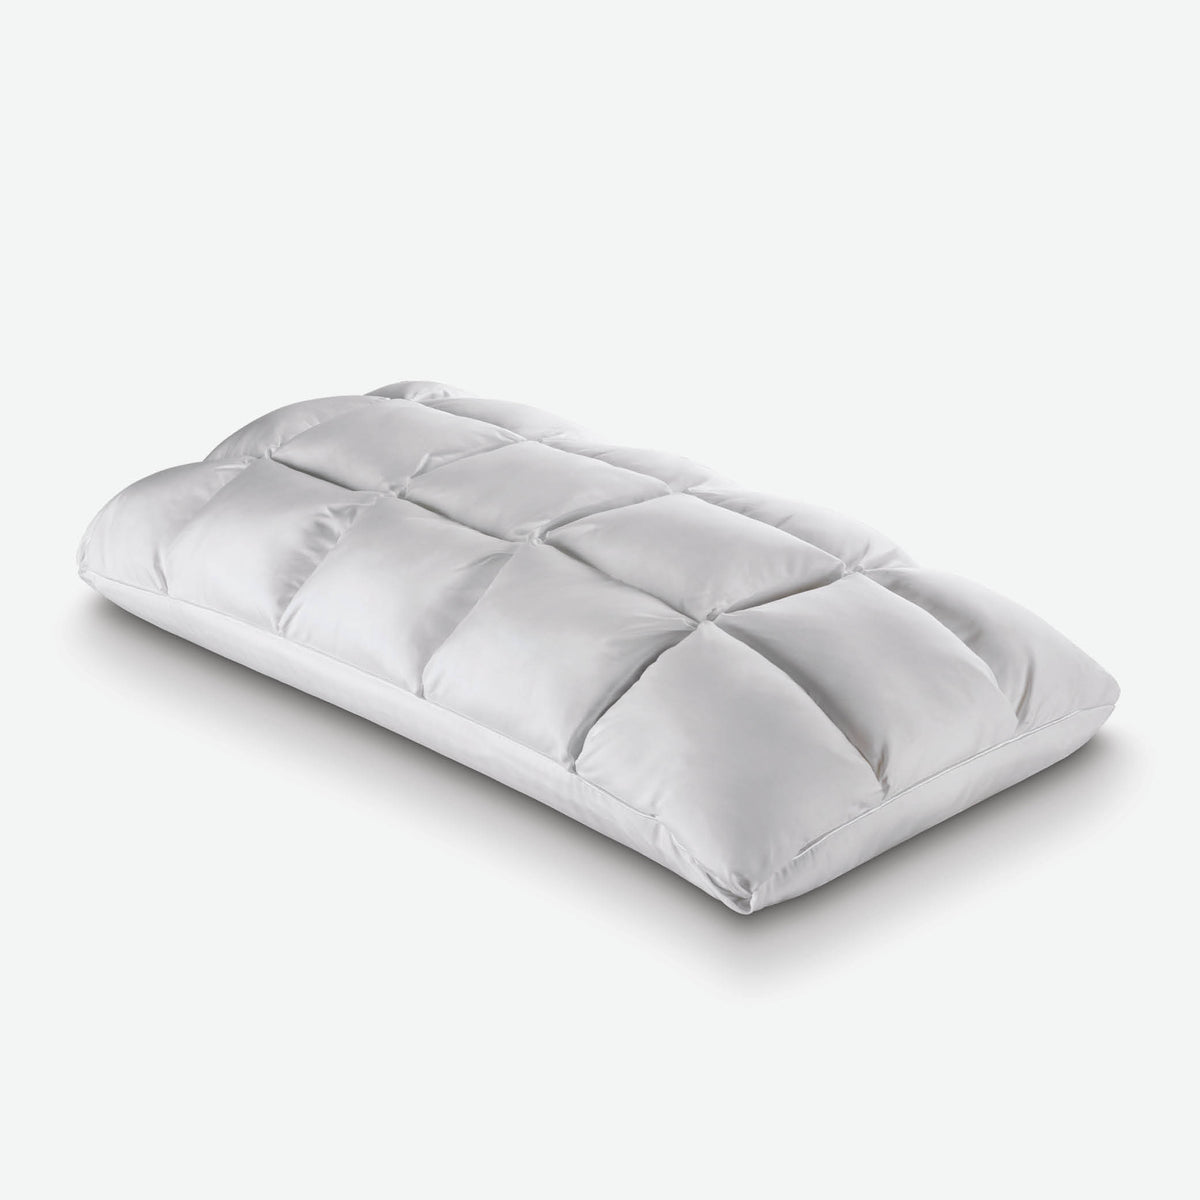 Image of the Cooling SoftCell® Chill Pillow with the SoftCell side facing up on a white background